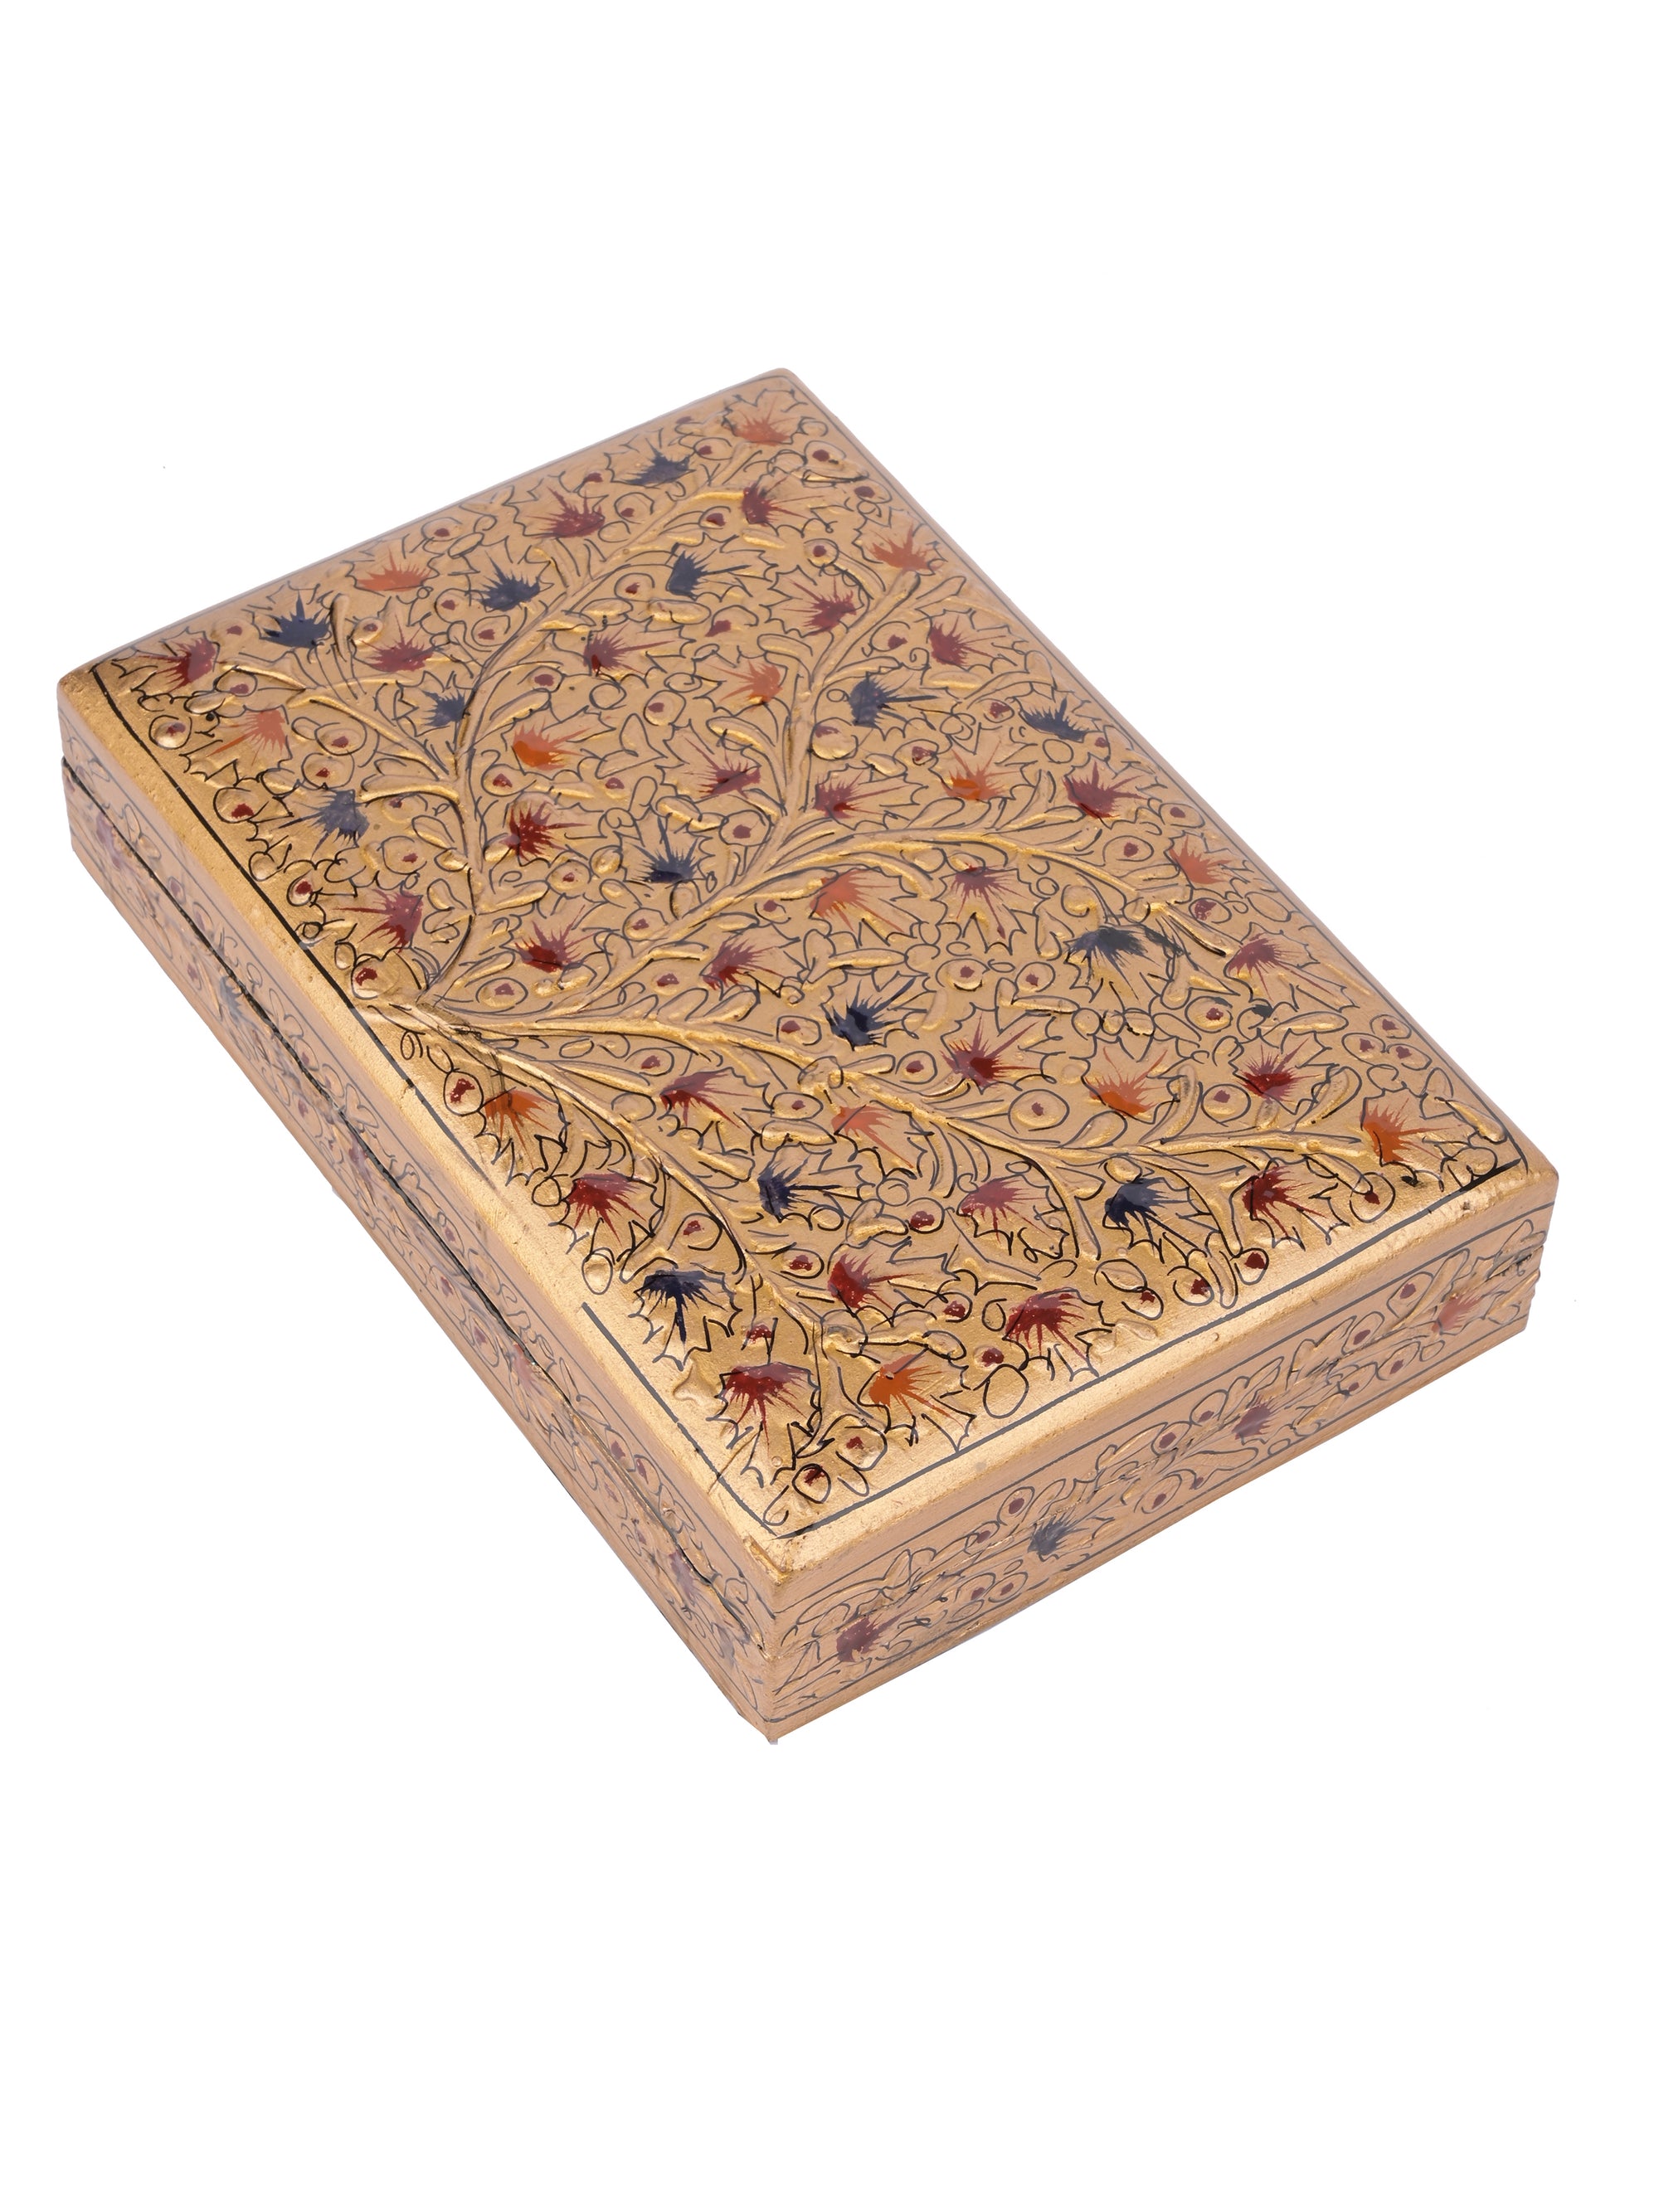 Rectangular Paper Mache Multi purpose storage box with Golden floral pattern embossed - The Heritage Artifacts